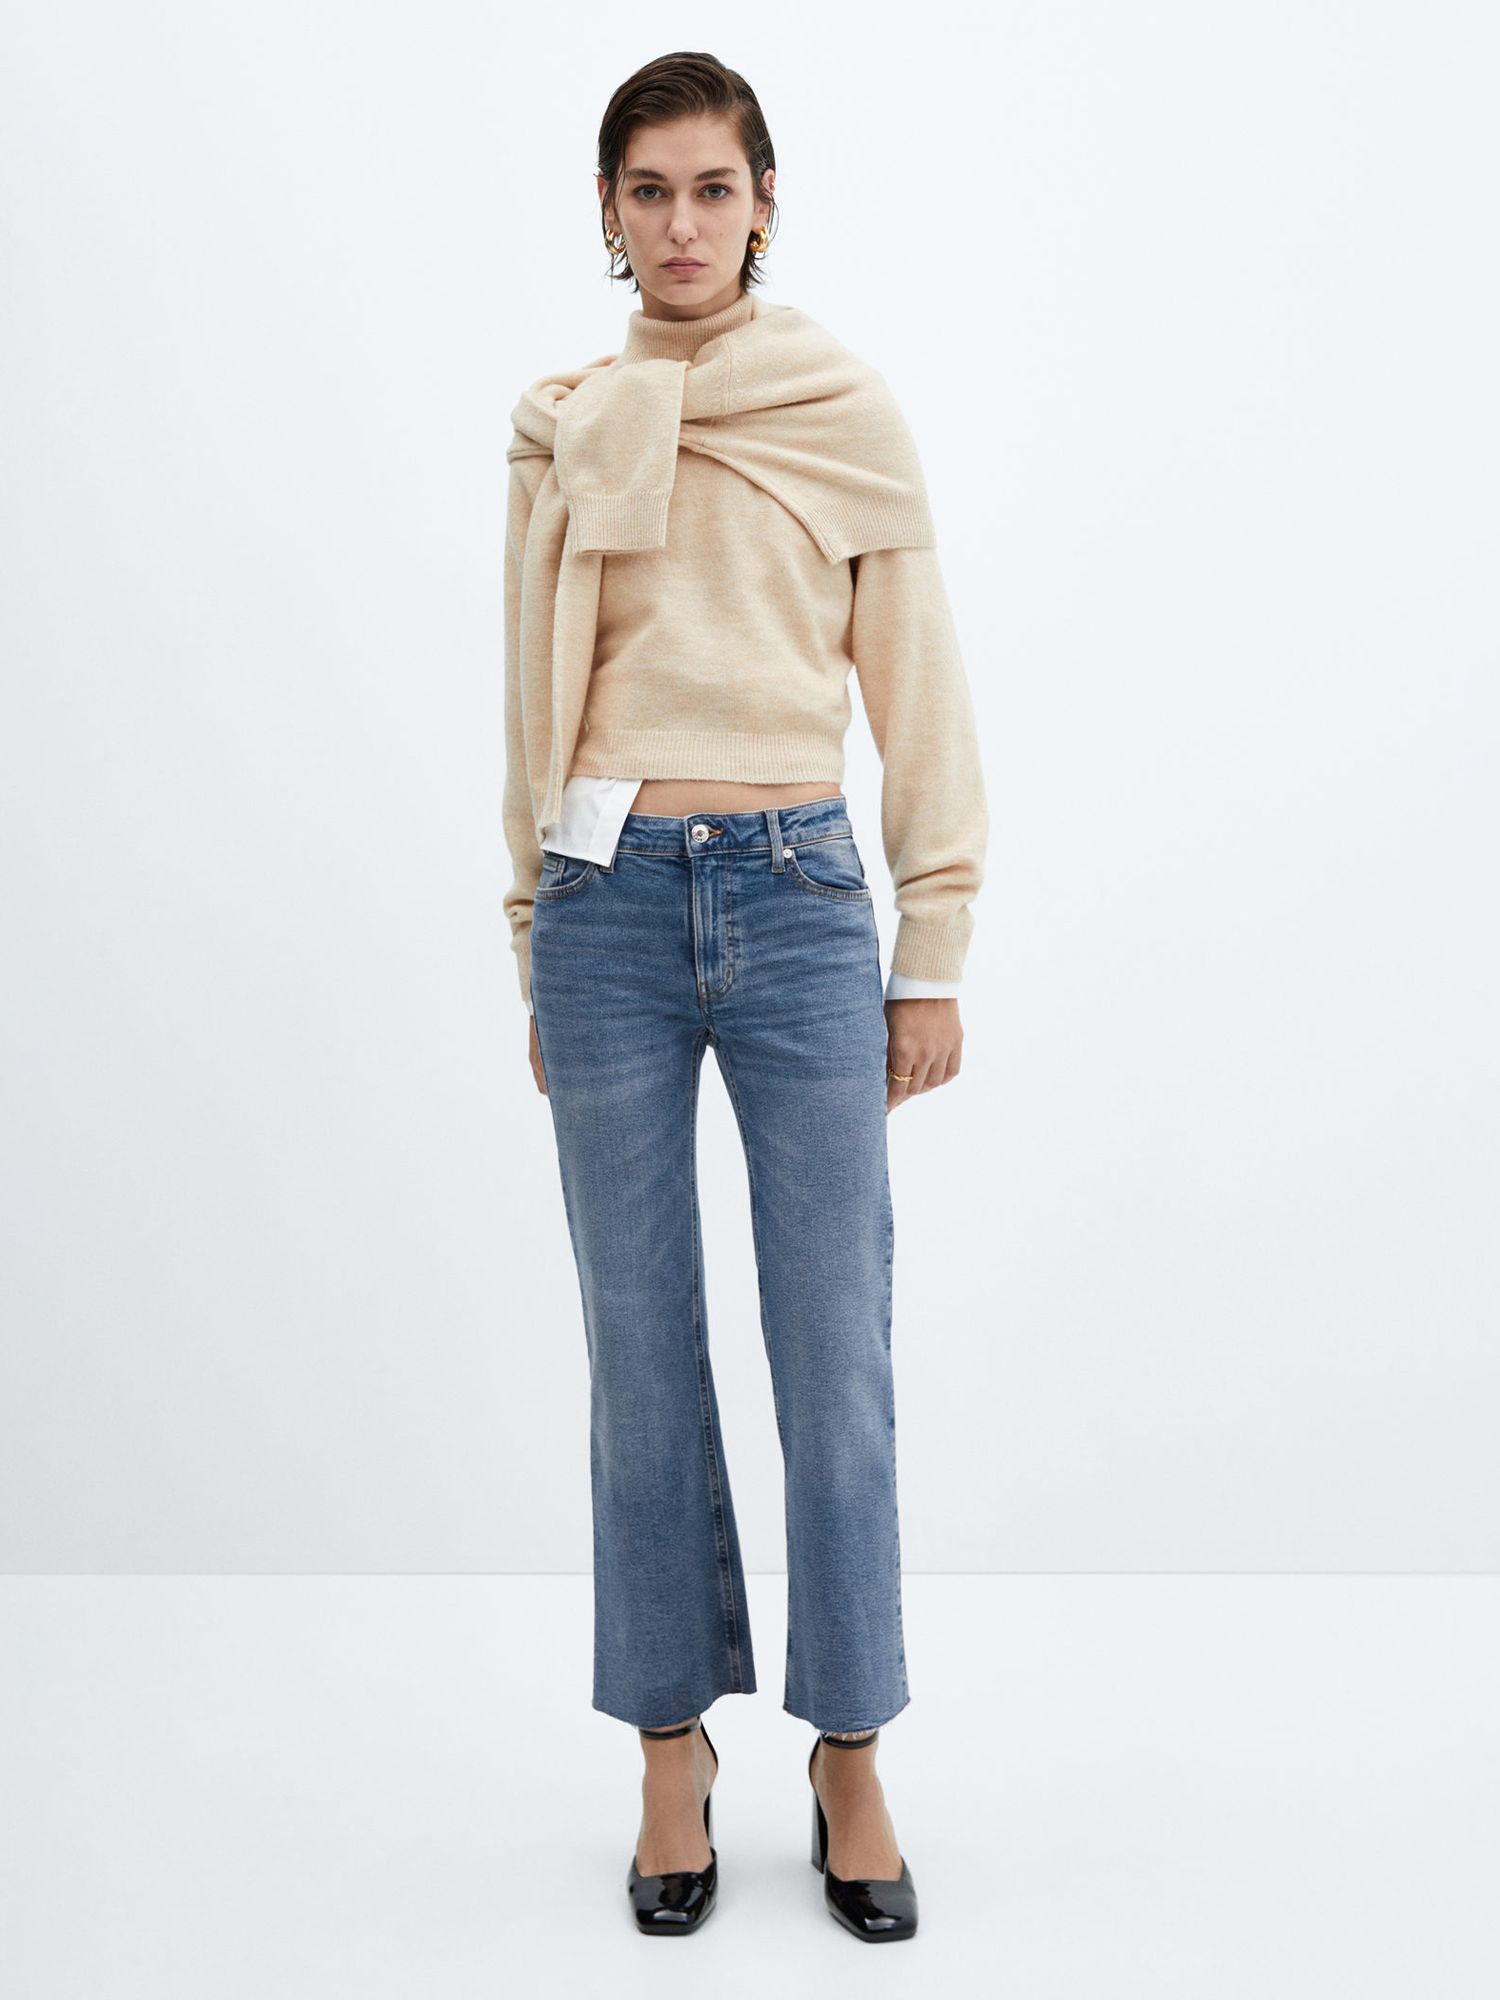 Mango Sienna Cropped Flared Jeans, Light Blue at John Lewis & Partners